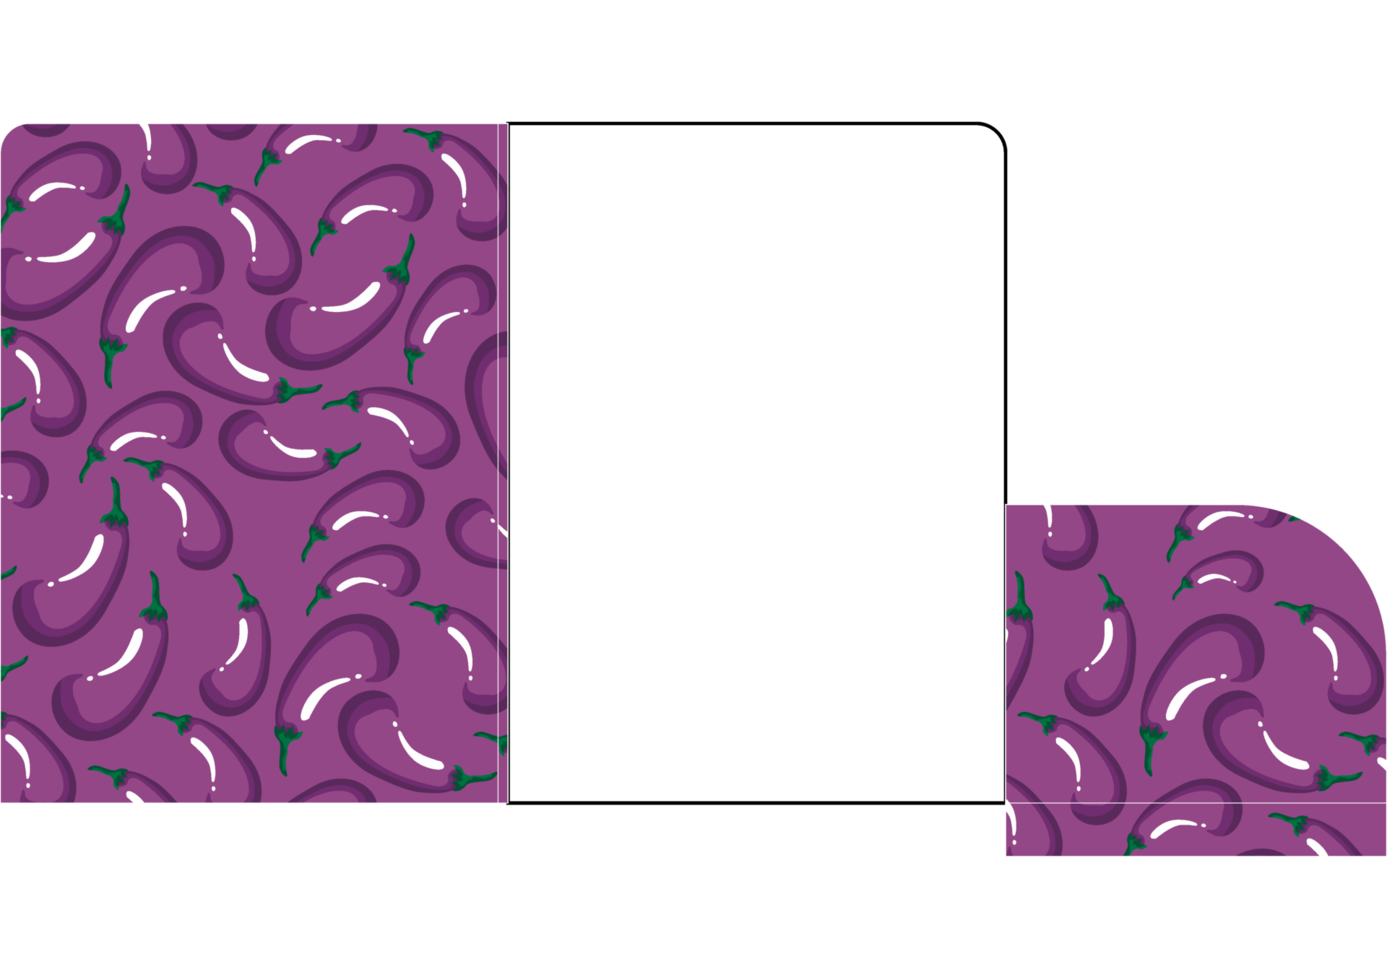 File Folder Design with eggplant pattern theme png